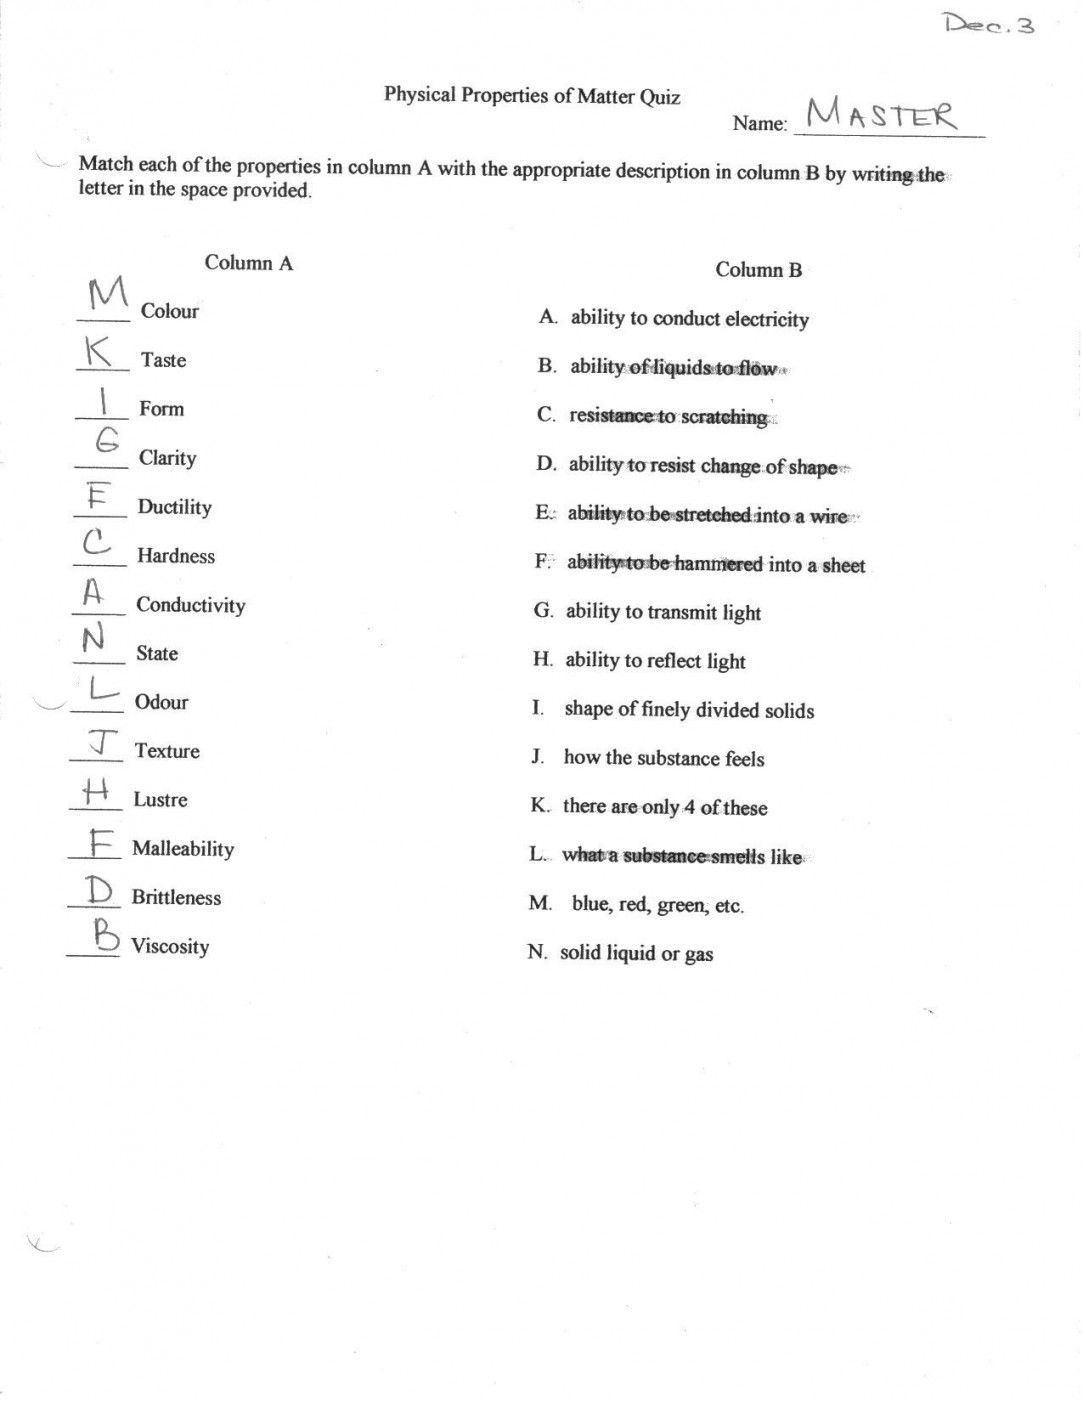 Physical And Chemical Changes Worksheet